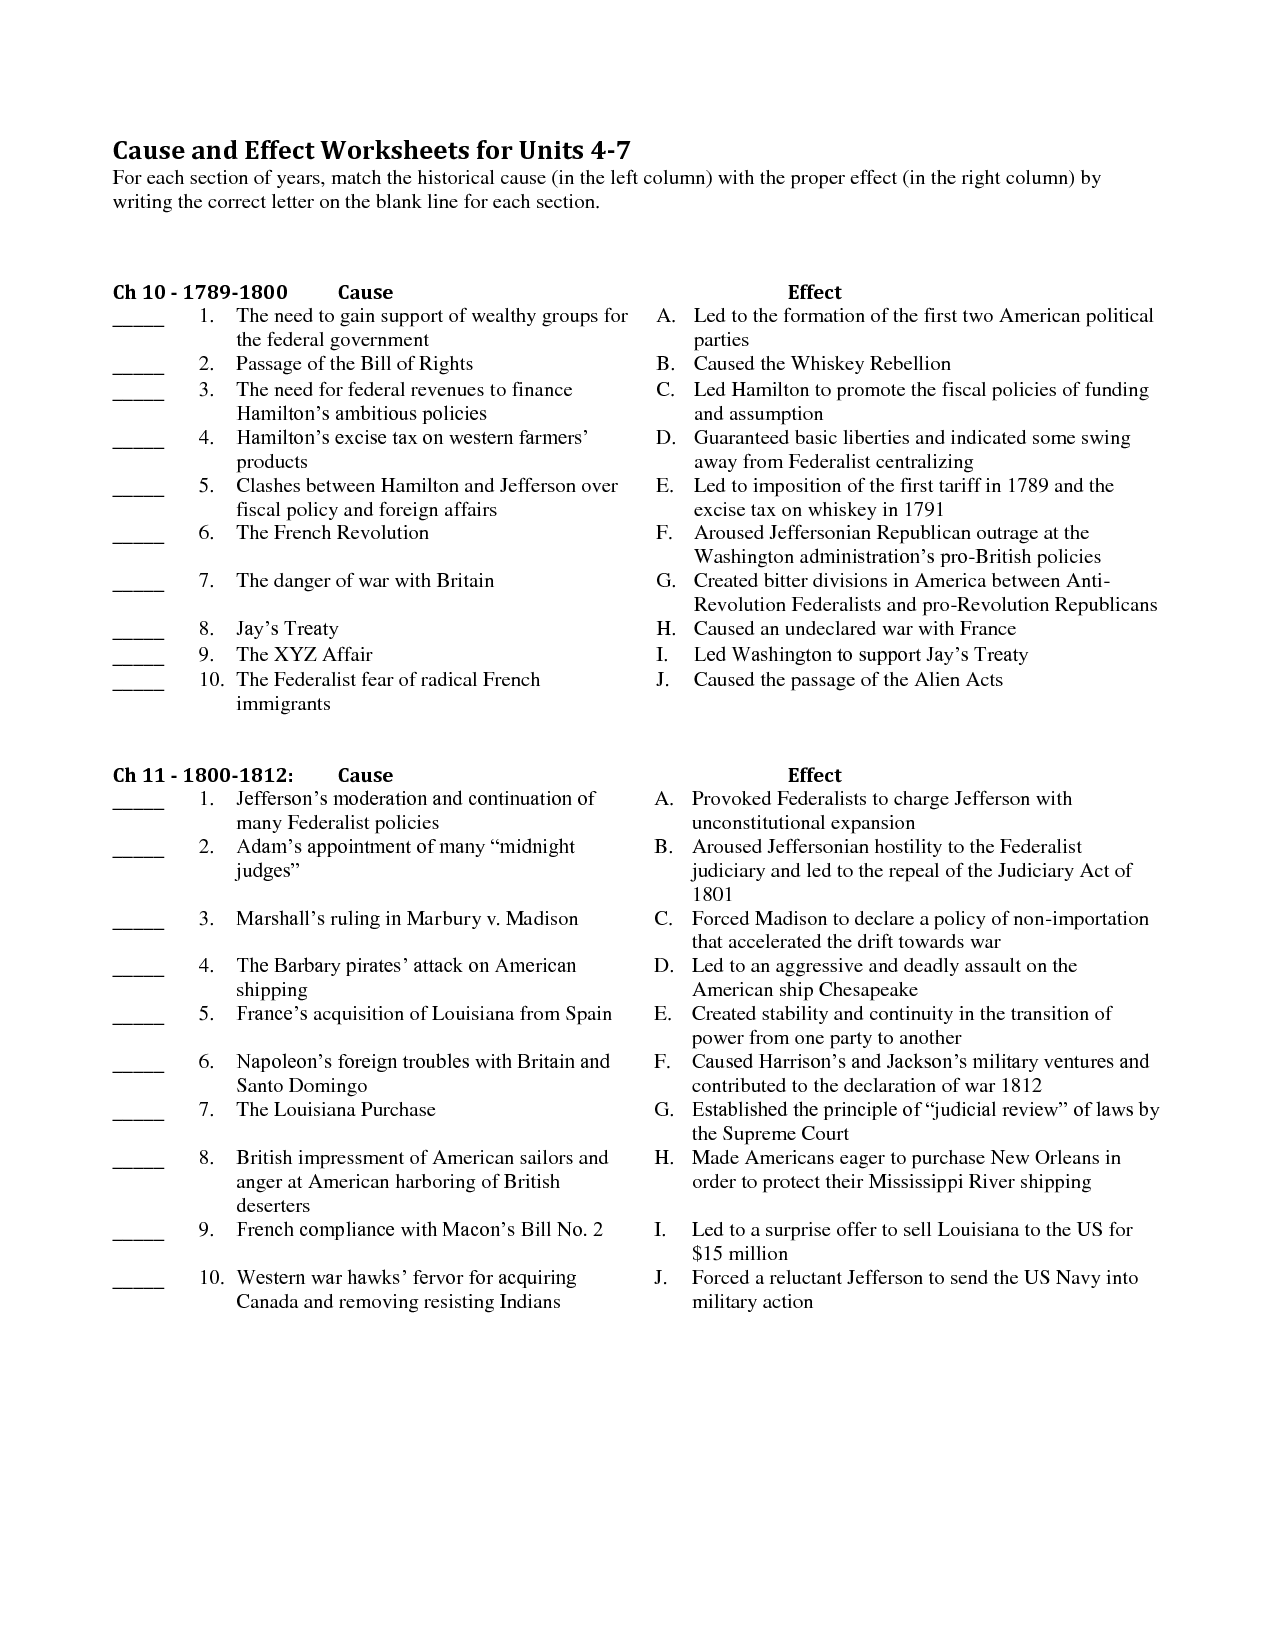 9 Best Images of Cause And Effect Blank Worksheets - Cause ...